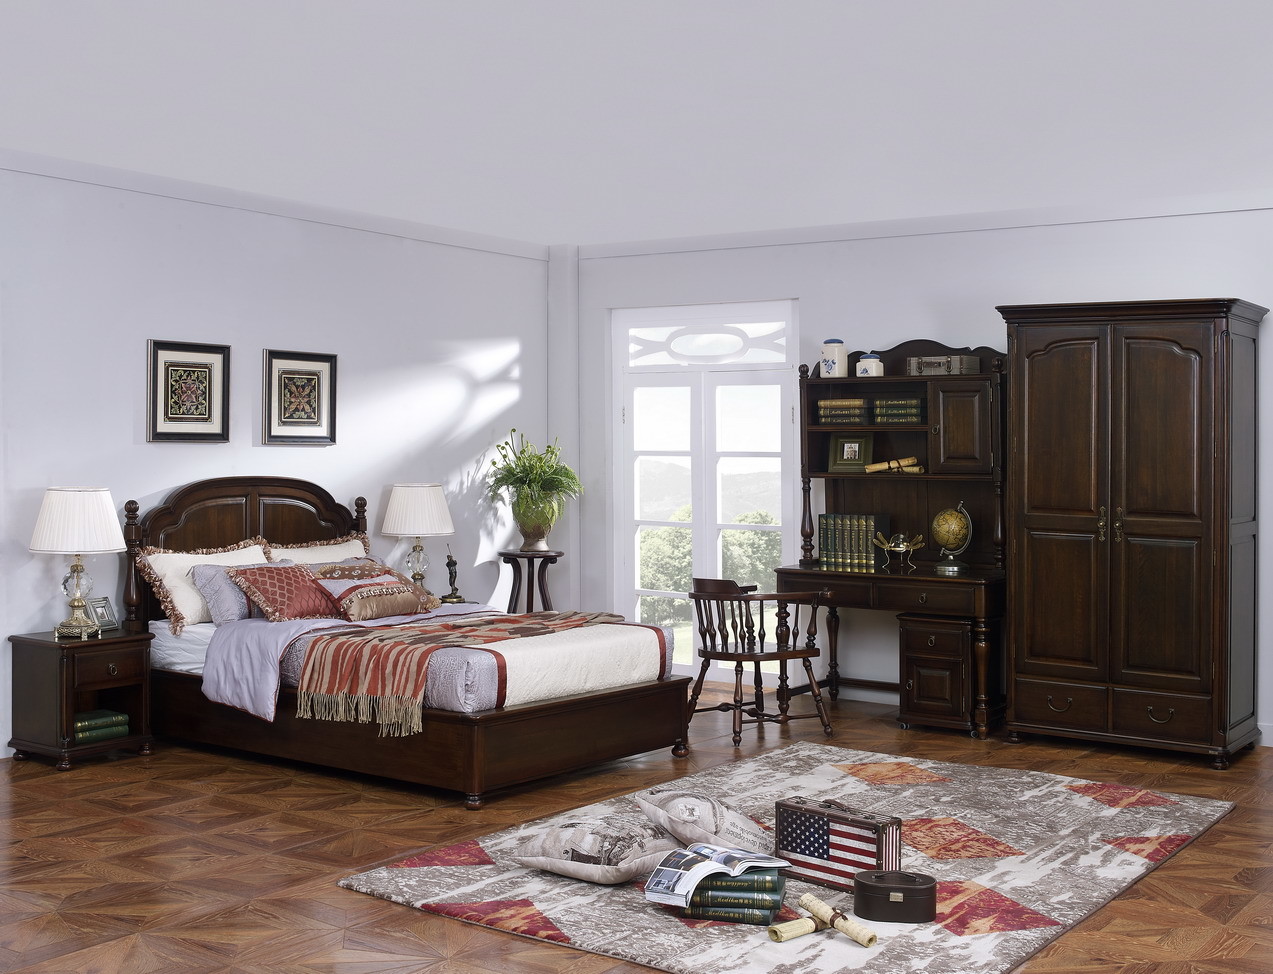 Wholesale American Leisure Antique Design Single bedroom furniture Small bed with writing Desk and Bookcase and 2 door wardrobe from china suppliers